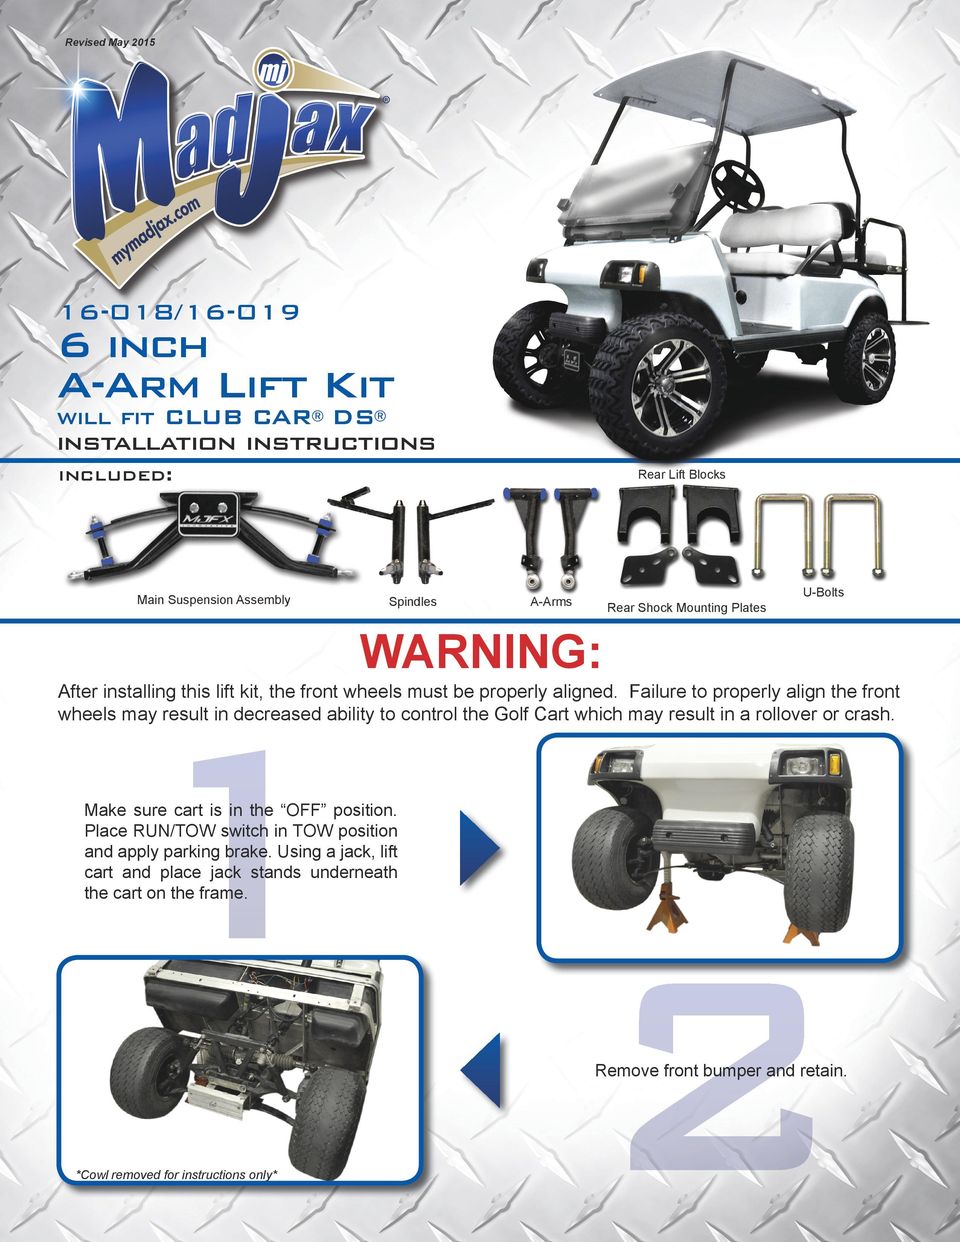 Failure to properly align the front wheels may result in decreased ability to control the Golf Cart which may result in a rollover or crash.